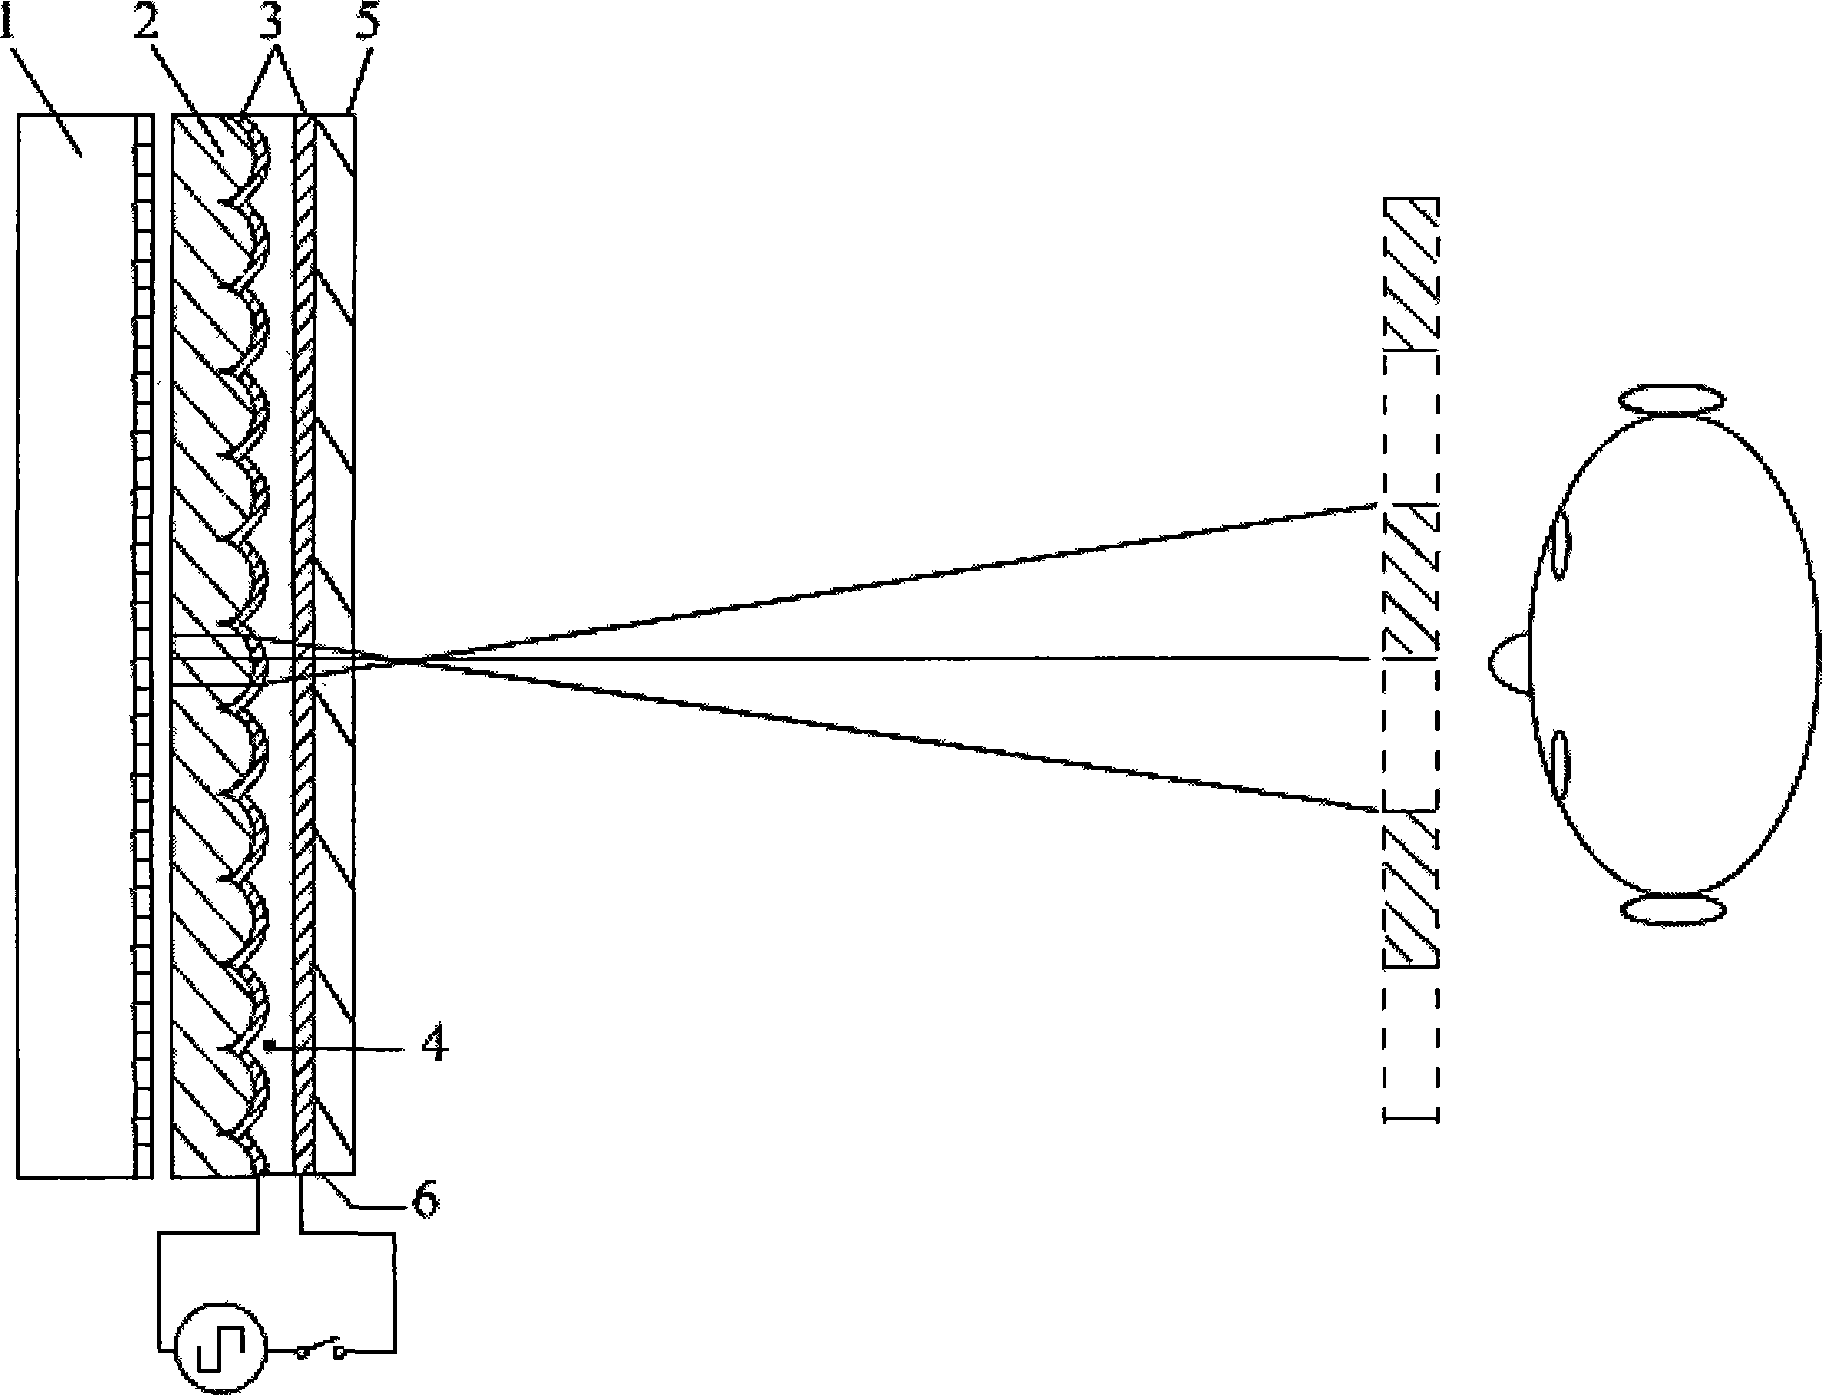 2D-3D convertible stereo display device